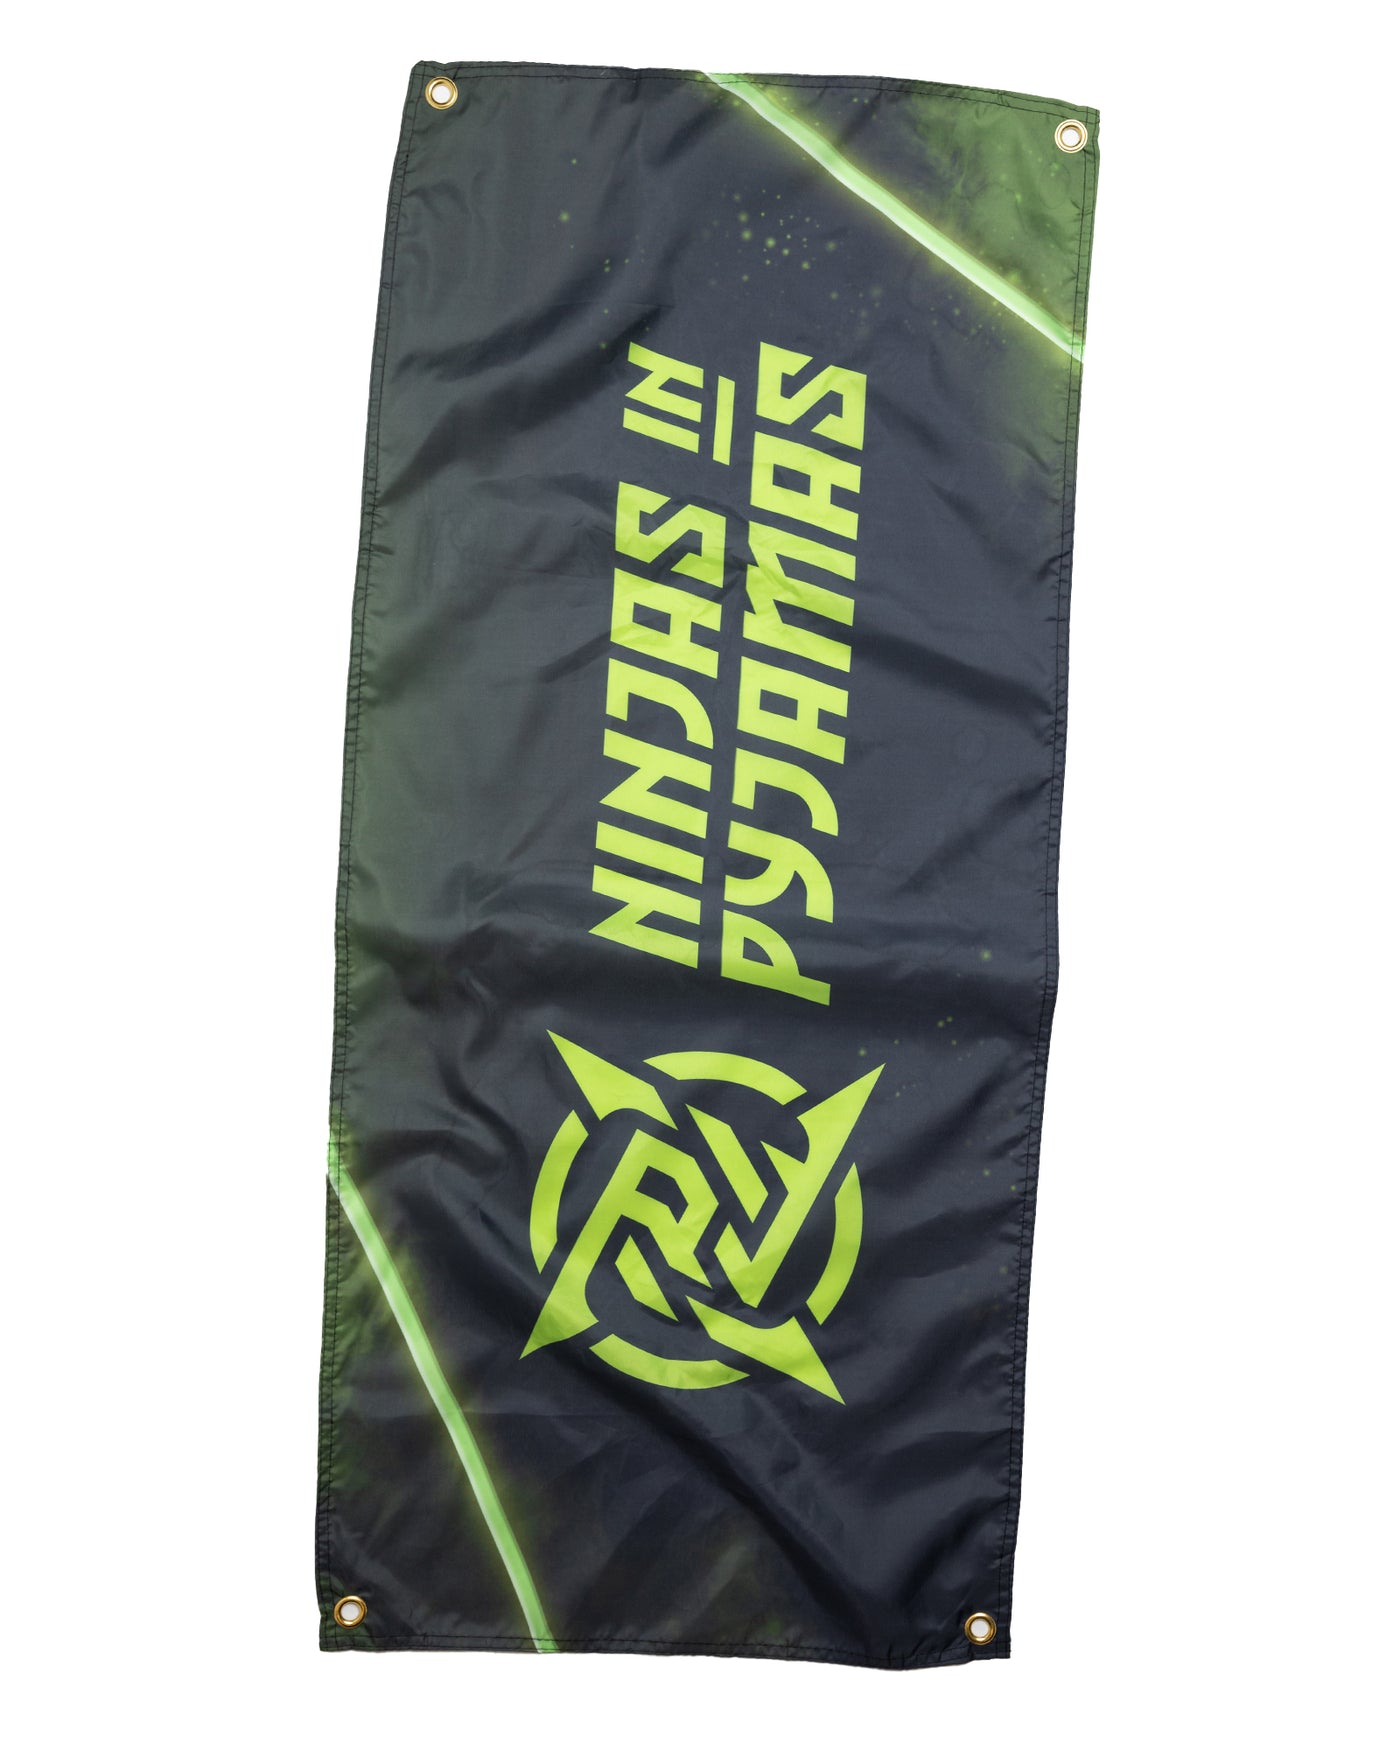  A high-quality flag featuring the iconic Ninjas in Pyjamas logo in bold colors on a black background. This premium flag is made of durable material and is perfect for proudly displaying your support for NIP.